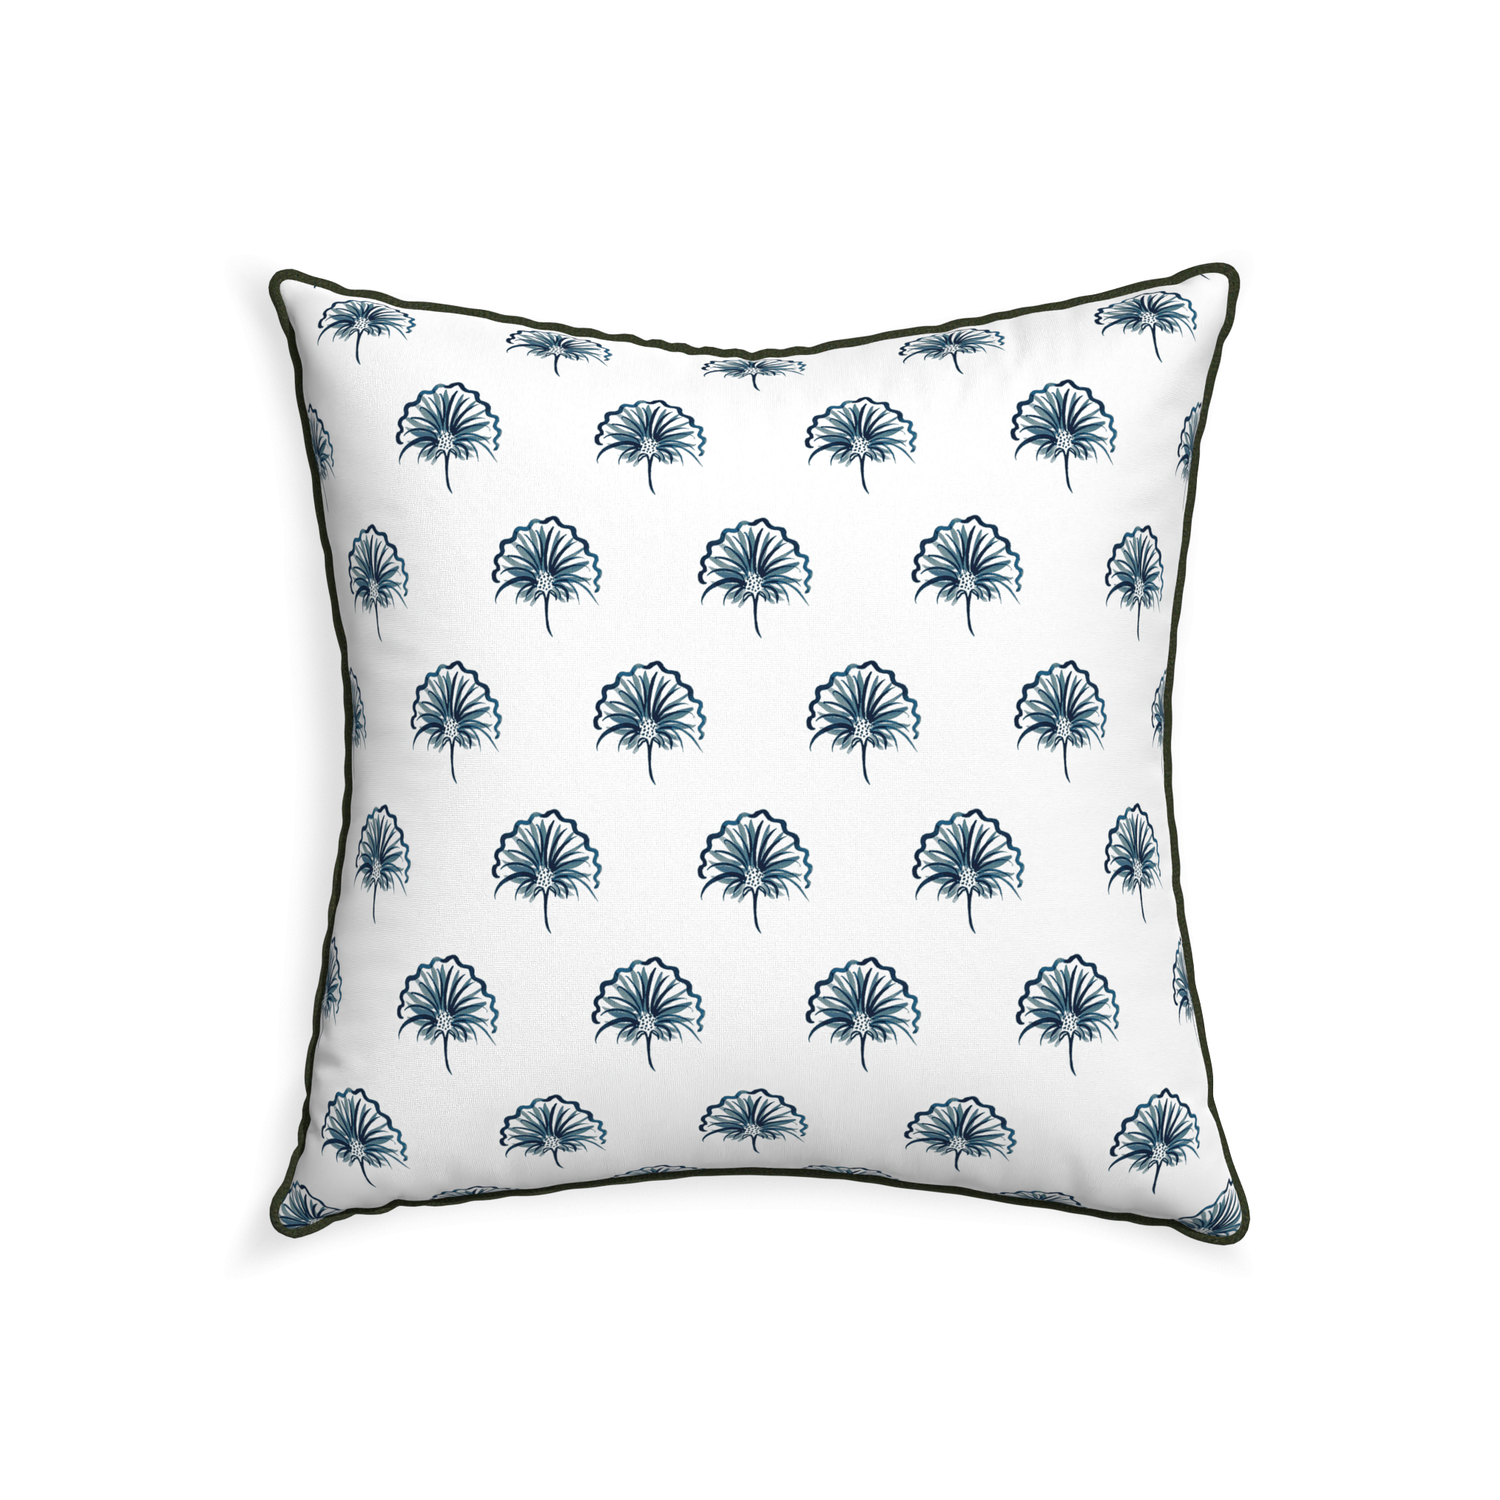 22-square penelope midnight custom floral navypillow with f piping on white background